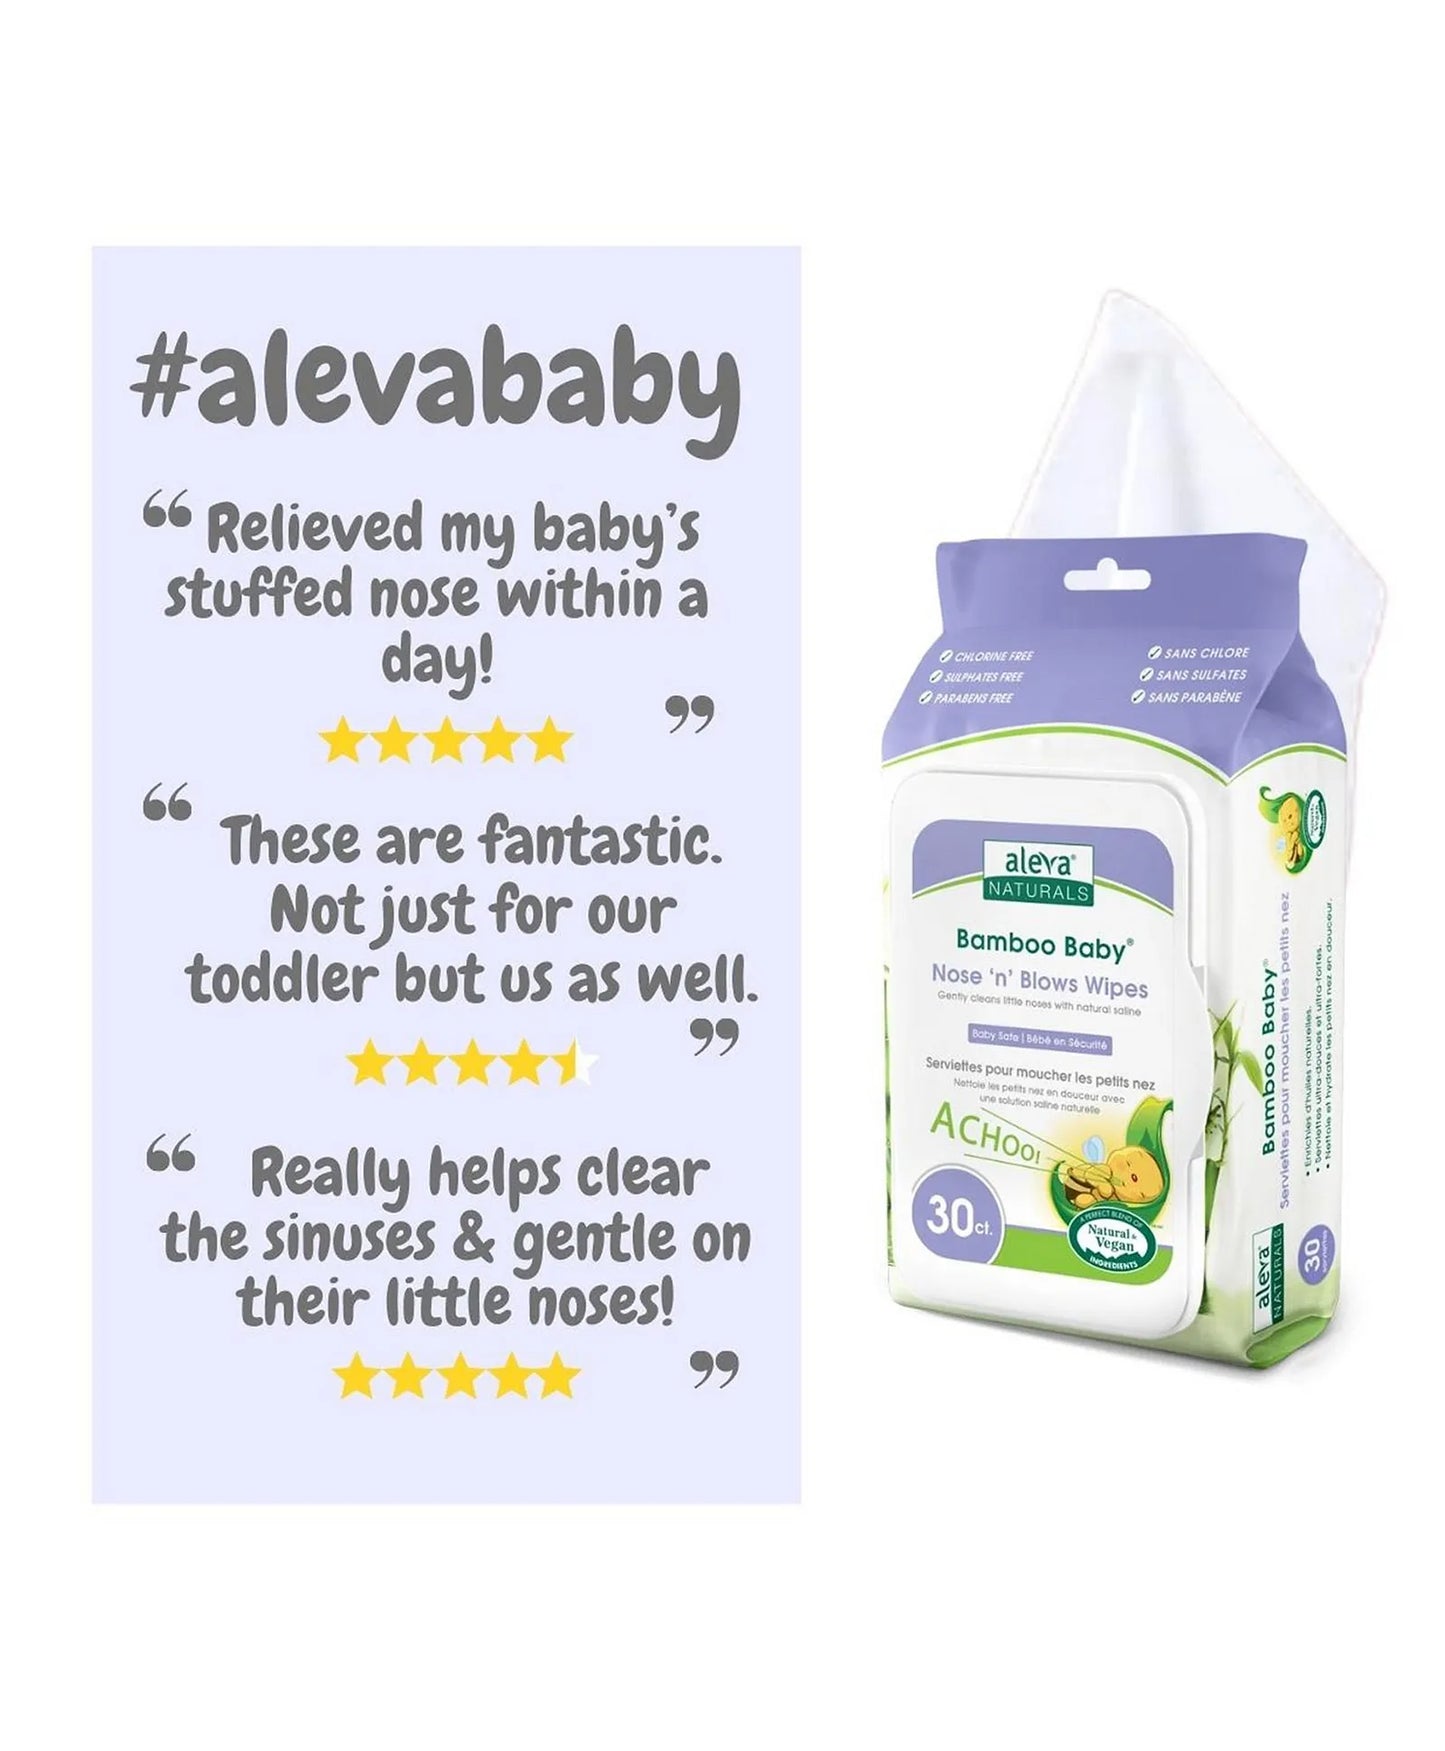 Aleva Naturals Bamboo Baby Specialty Nose 'N' Blows Wipes - 30ct